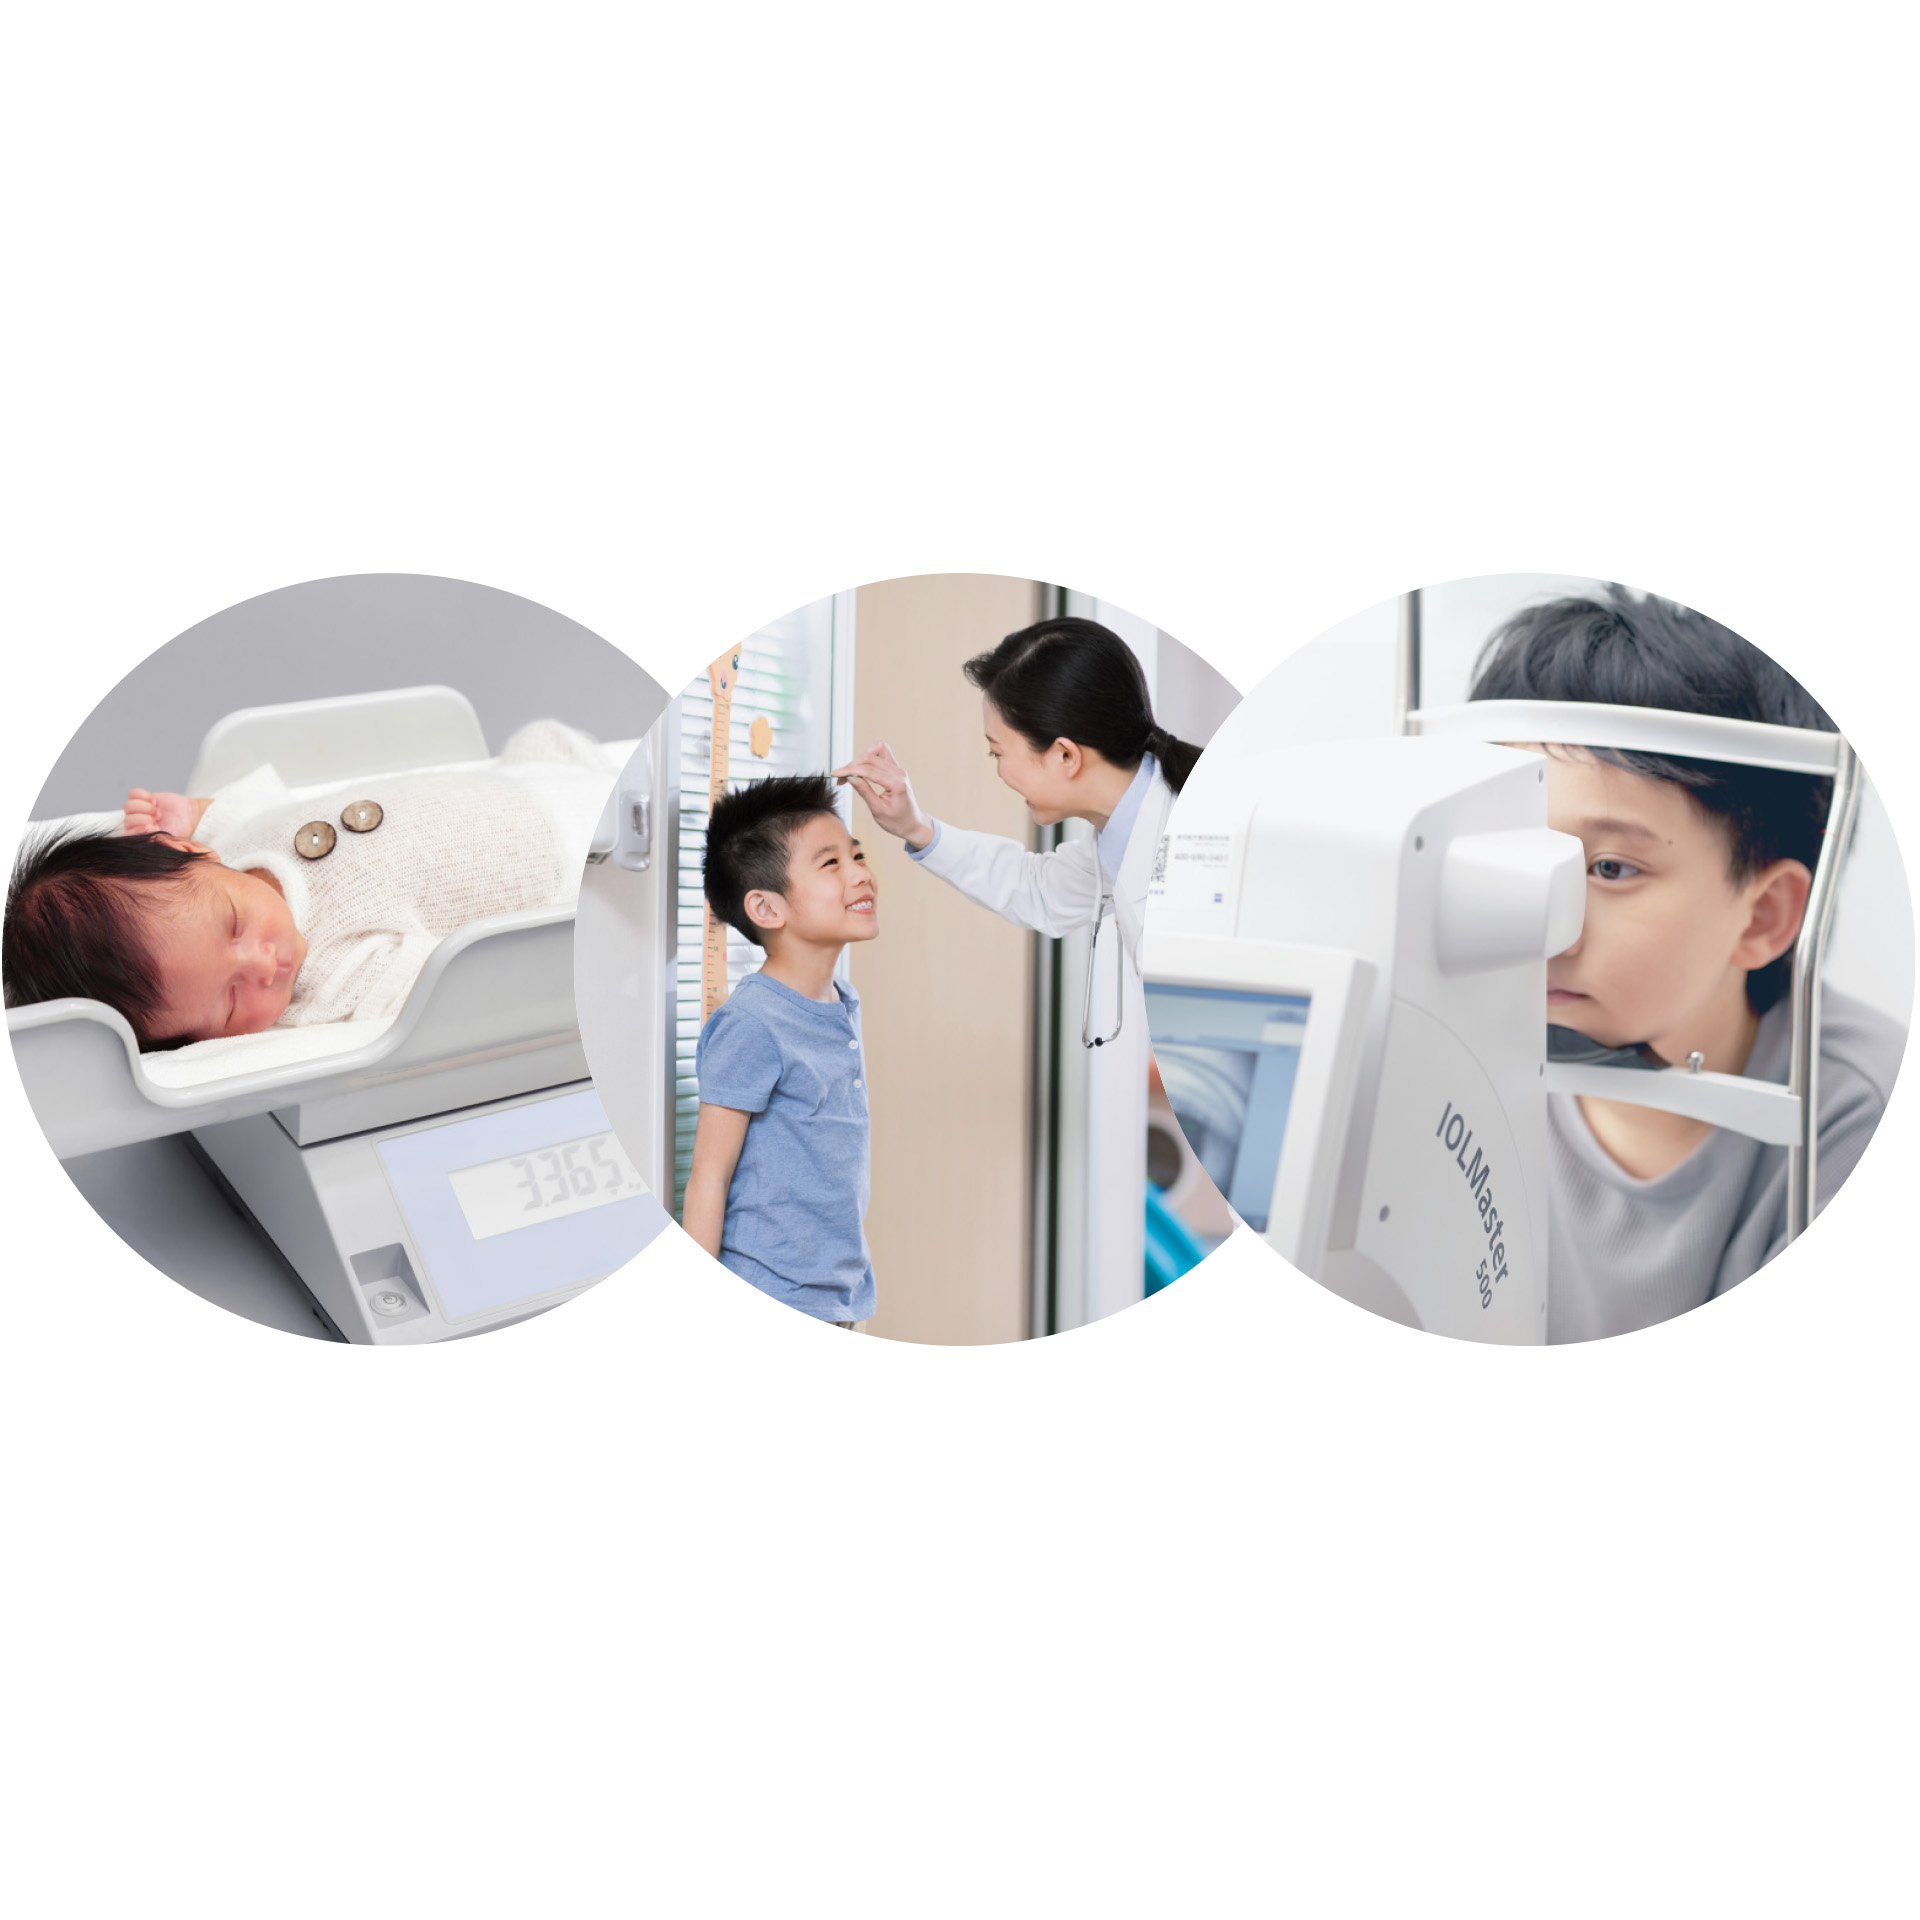 Three images depicting developmental milestones. On the left, a baby is placed on a scale; in the middle a boy is measured against a length chart on the wall; and on the right a boy is receiving an eye test.